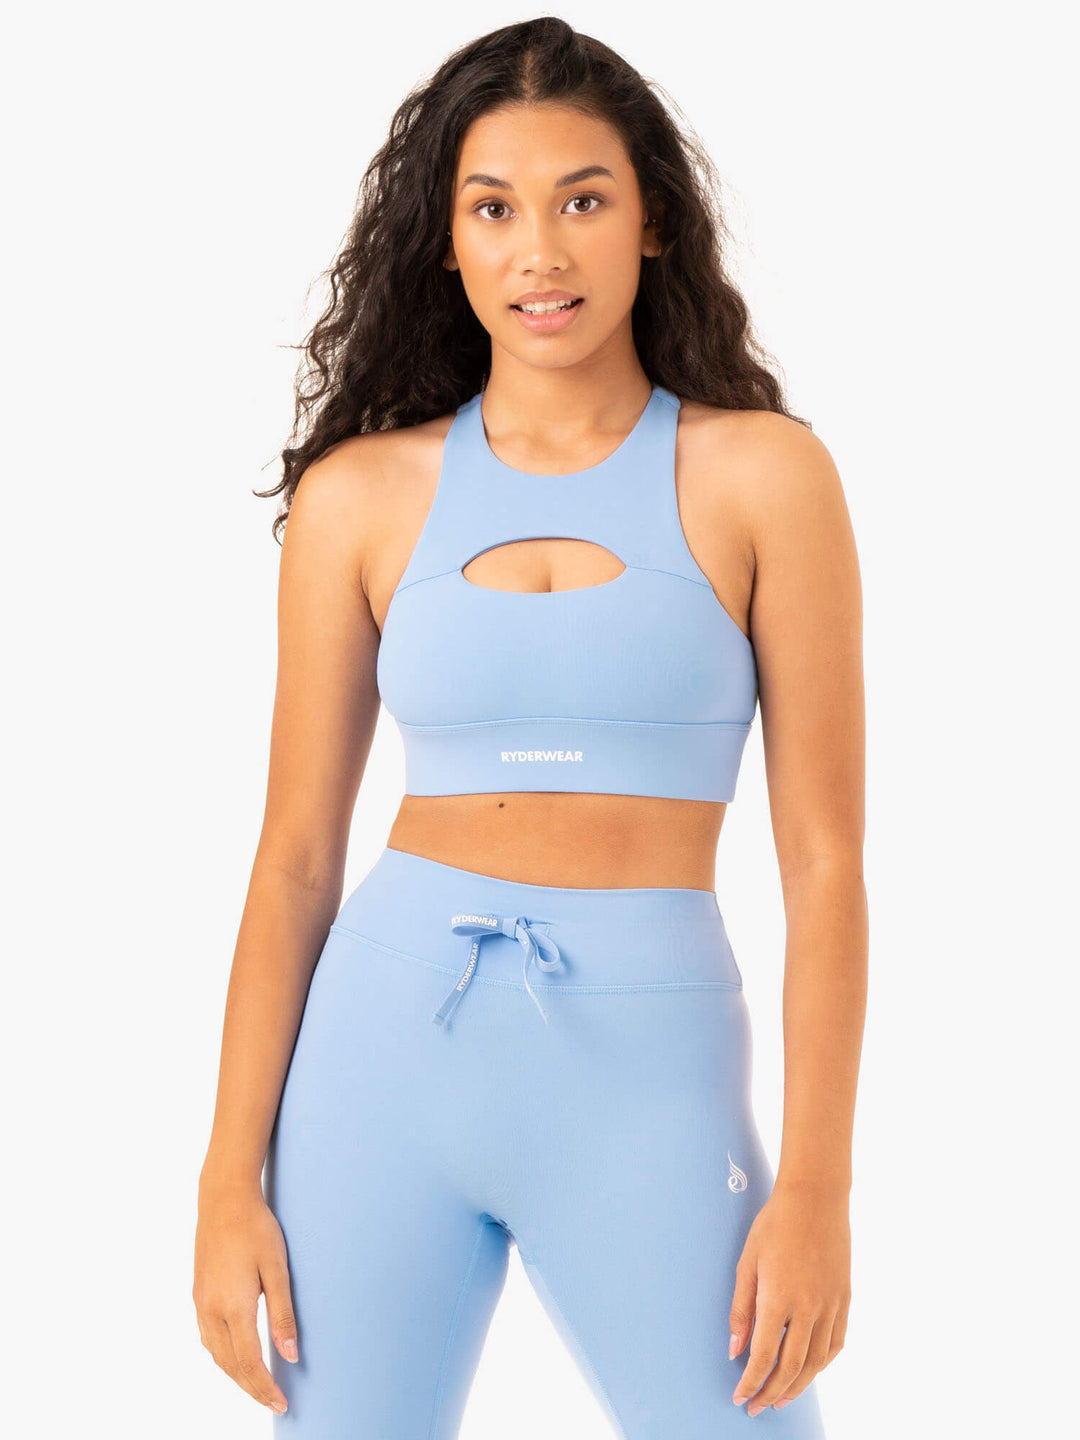 Replay Cut Out Sports Bra - Sky Blue Clothing Ryderwear 